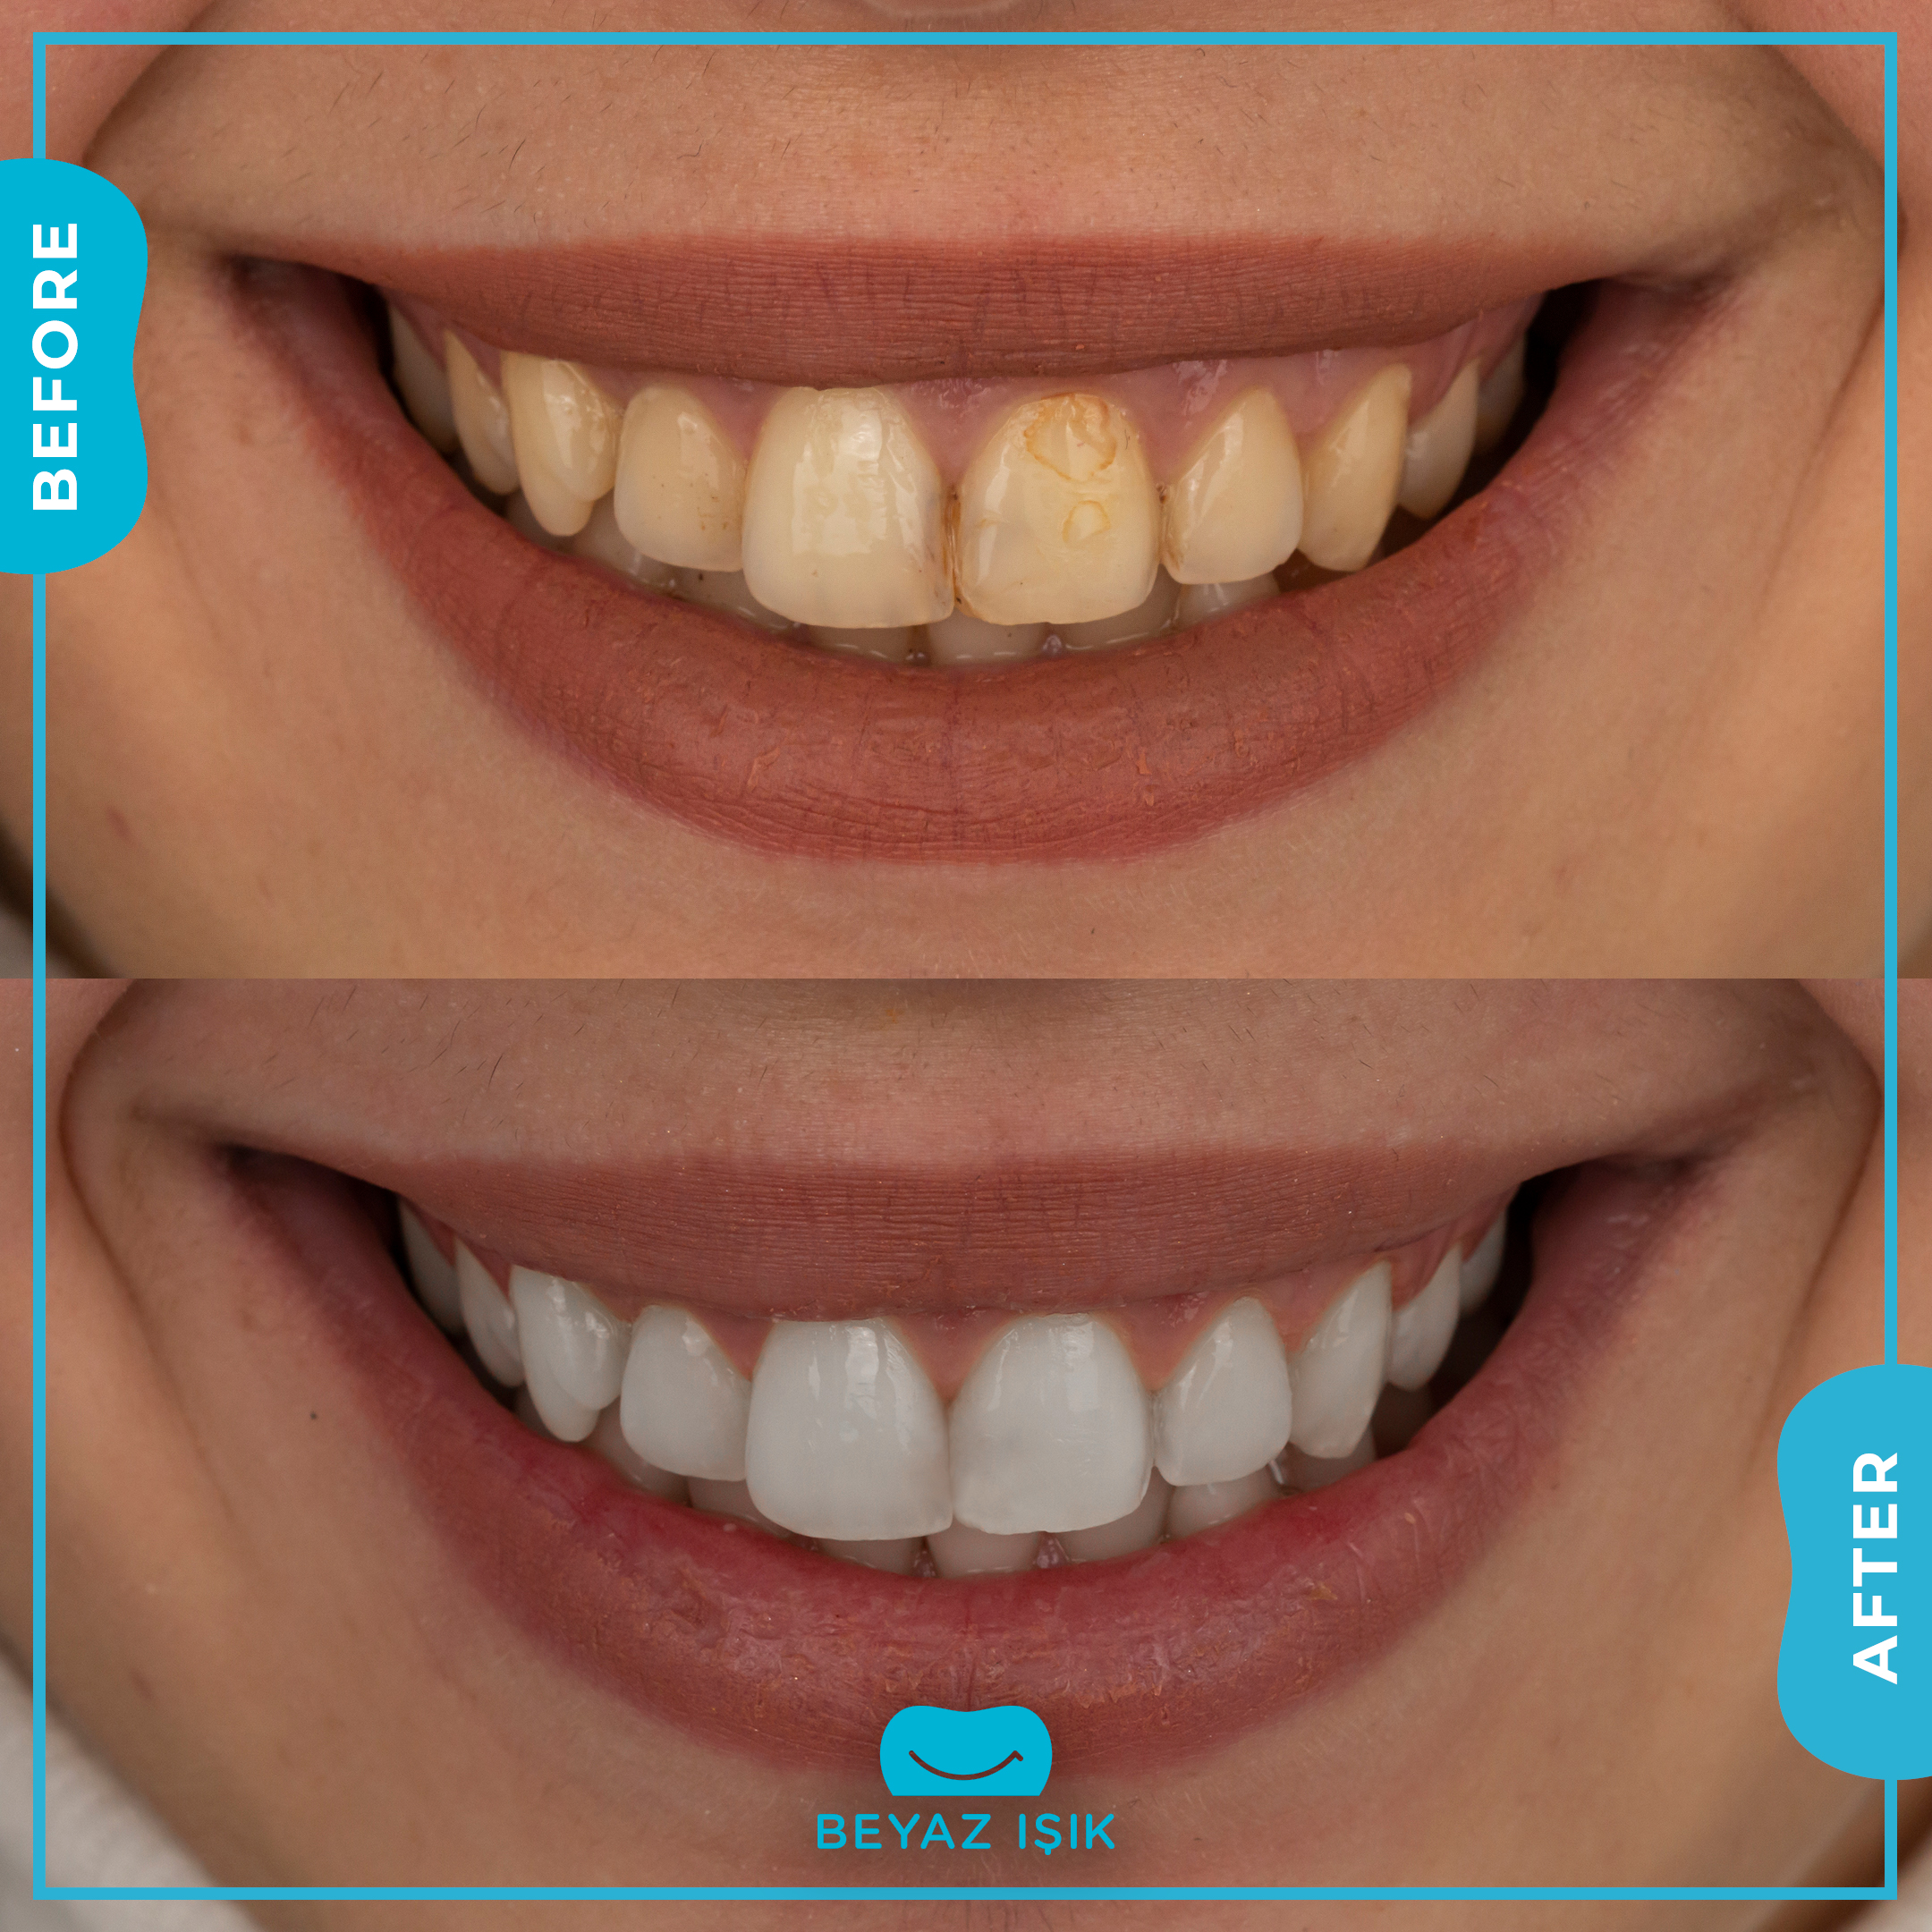 Teeth After and Before Whitening